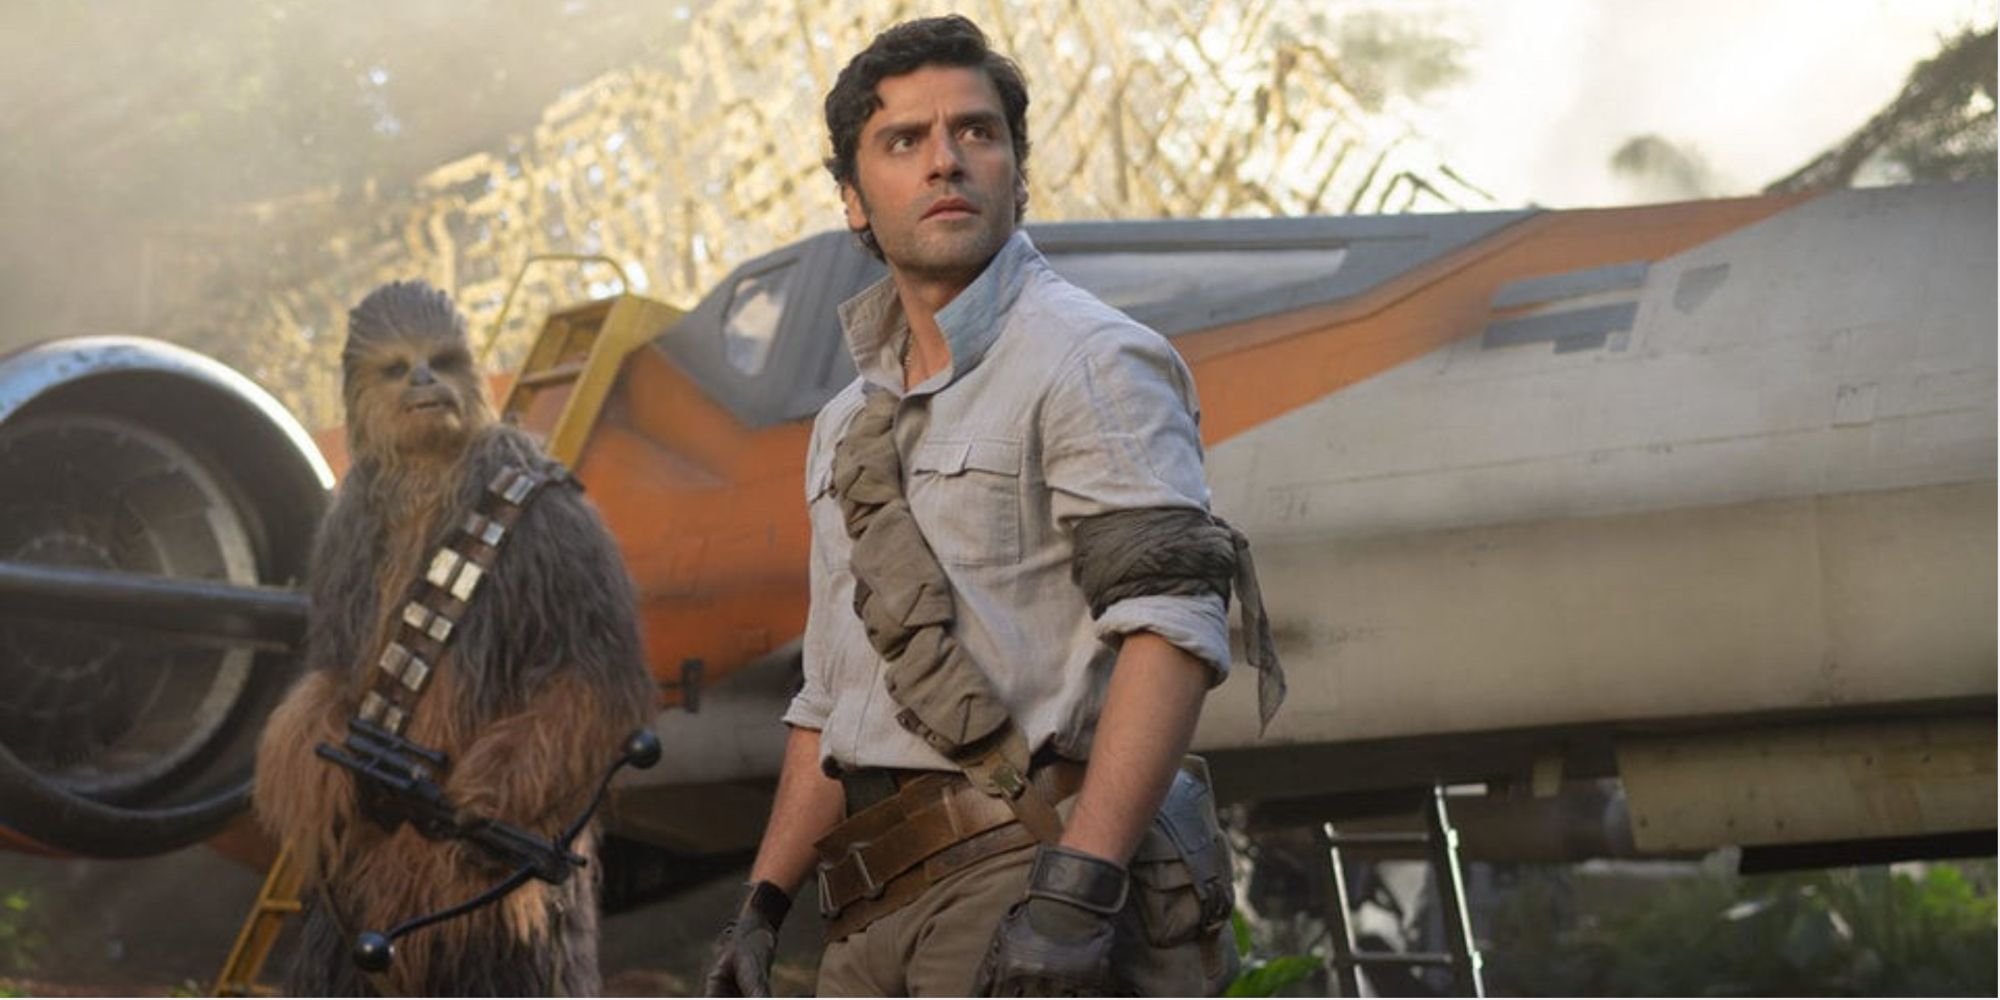 Poe Dameron from Star Wars with Chewbacca